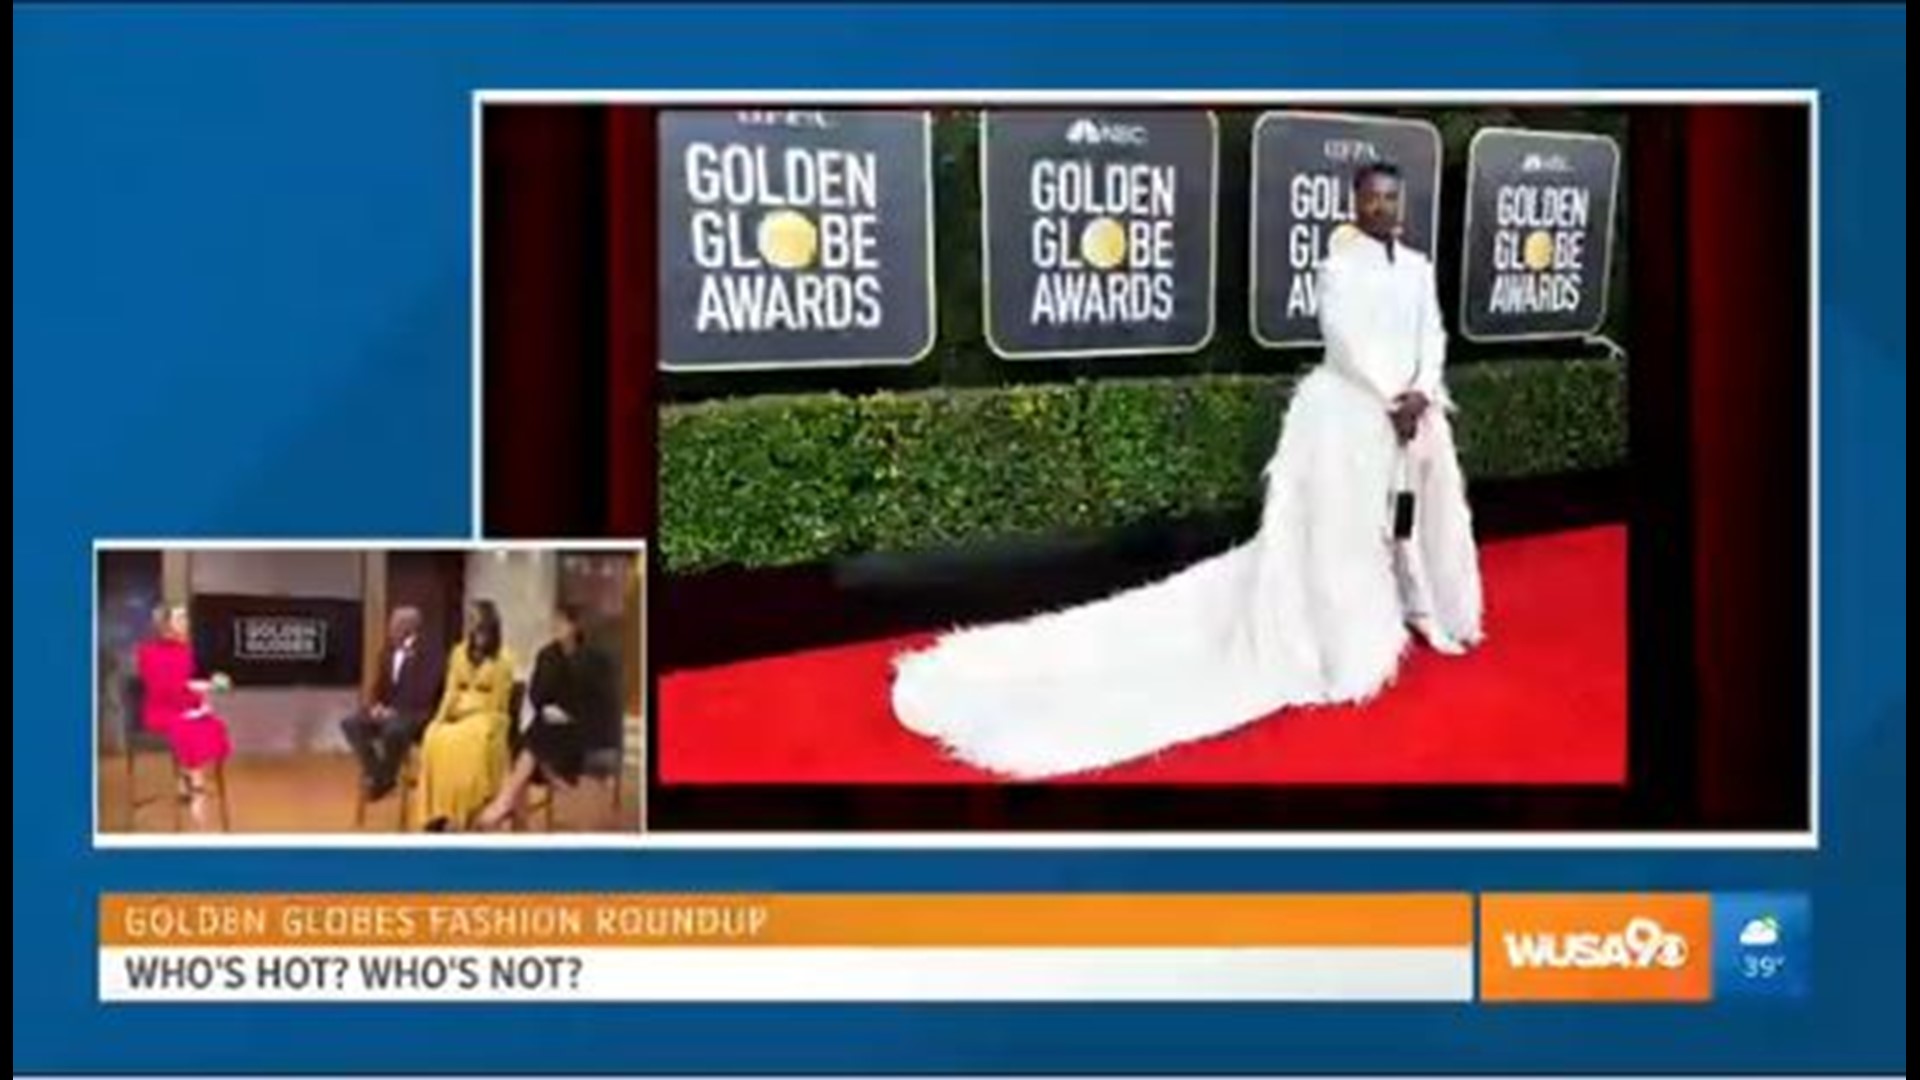 The Great Day Washington "style posse" recaps the fashion choices for the 2020 Golden Globes.